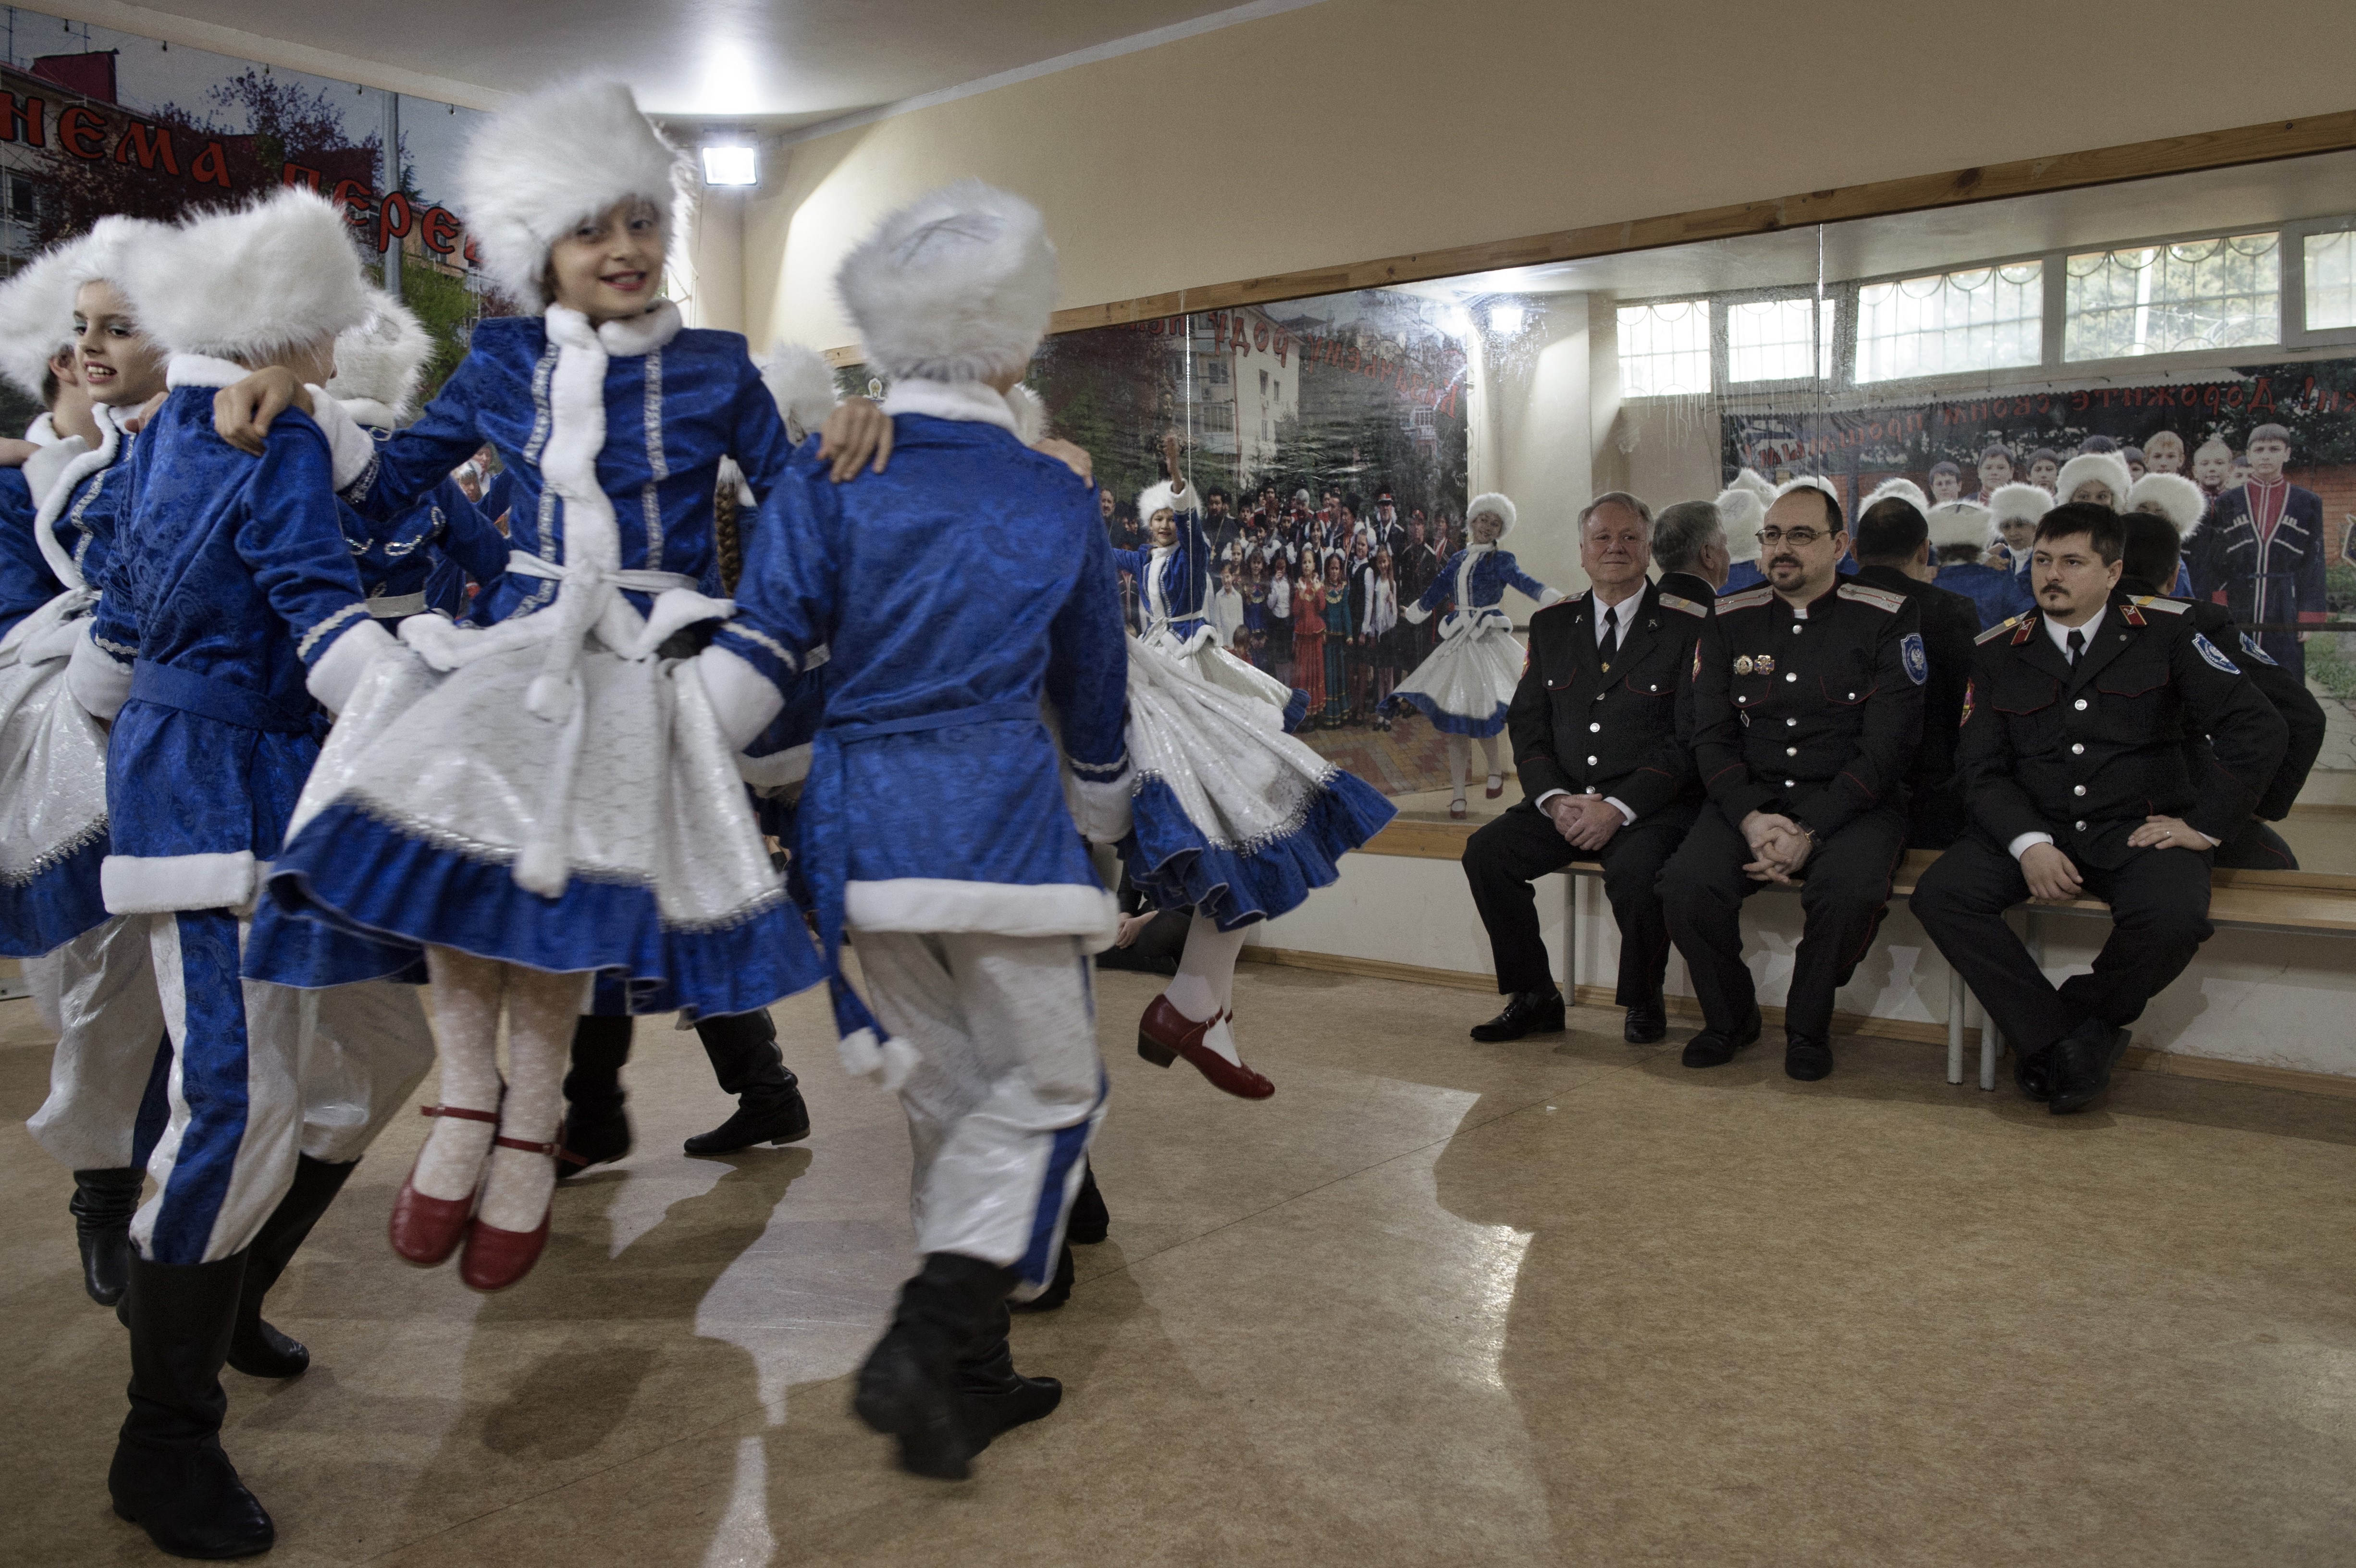 Sochi, Russia, Jan. 14, 2014: Cossack officers watch students perform a traditional Russian dance at School No. 10 in the city of Sochi. The dance classes are part of the Cossack curriculum recently implemented at the school under its director, Vladimir Davydov (pictured center). Davydov, a member of the Sochi city council, is an active member of the local Cossack community.